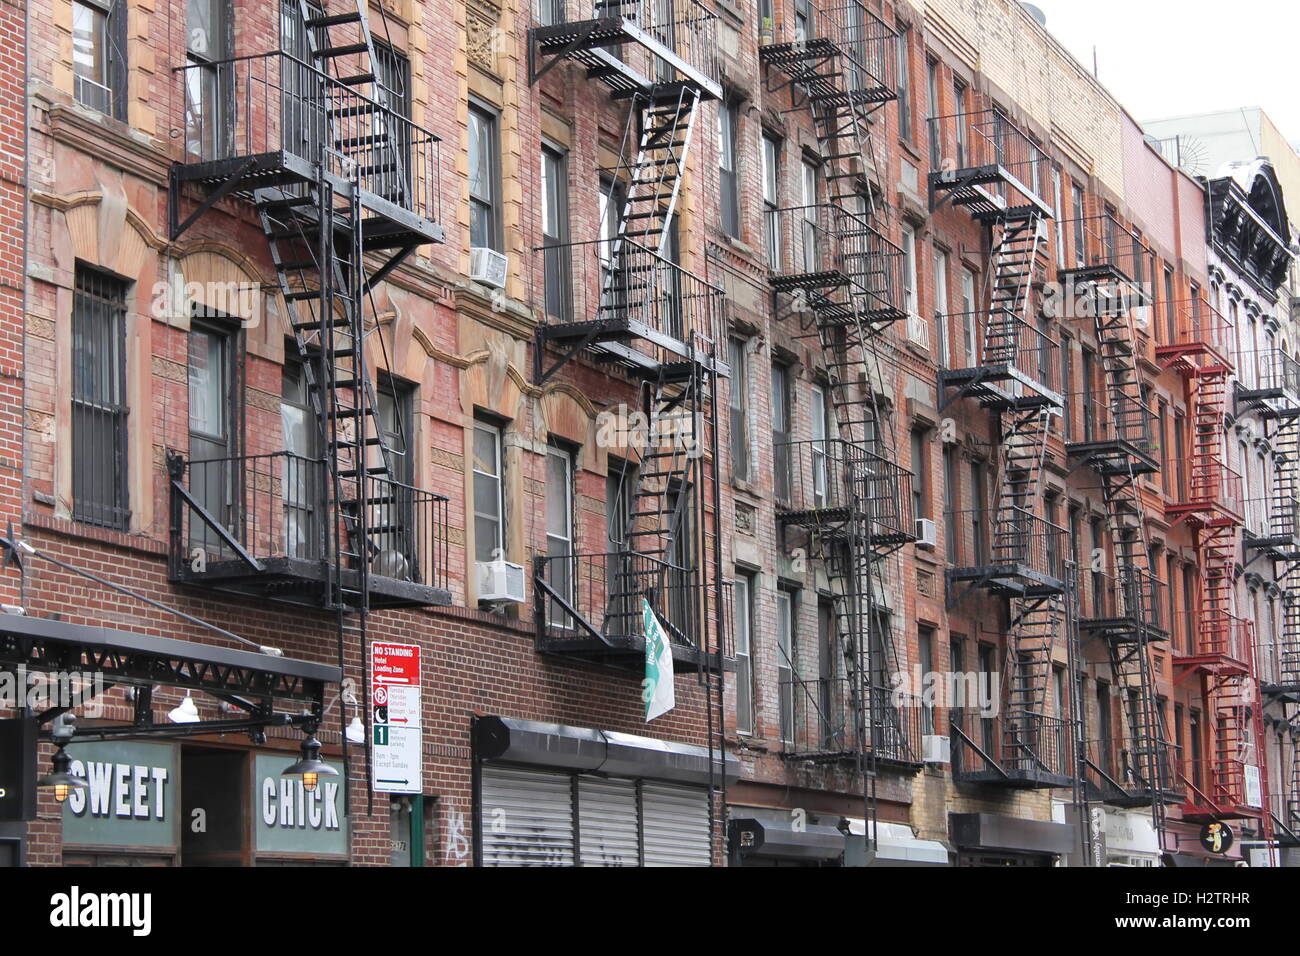 Old red brick apartment buildings in New York City Stock Photo